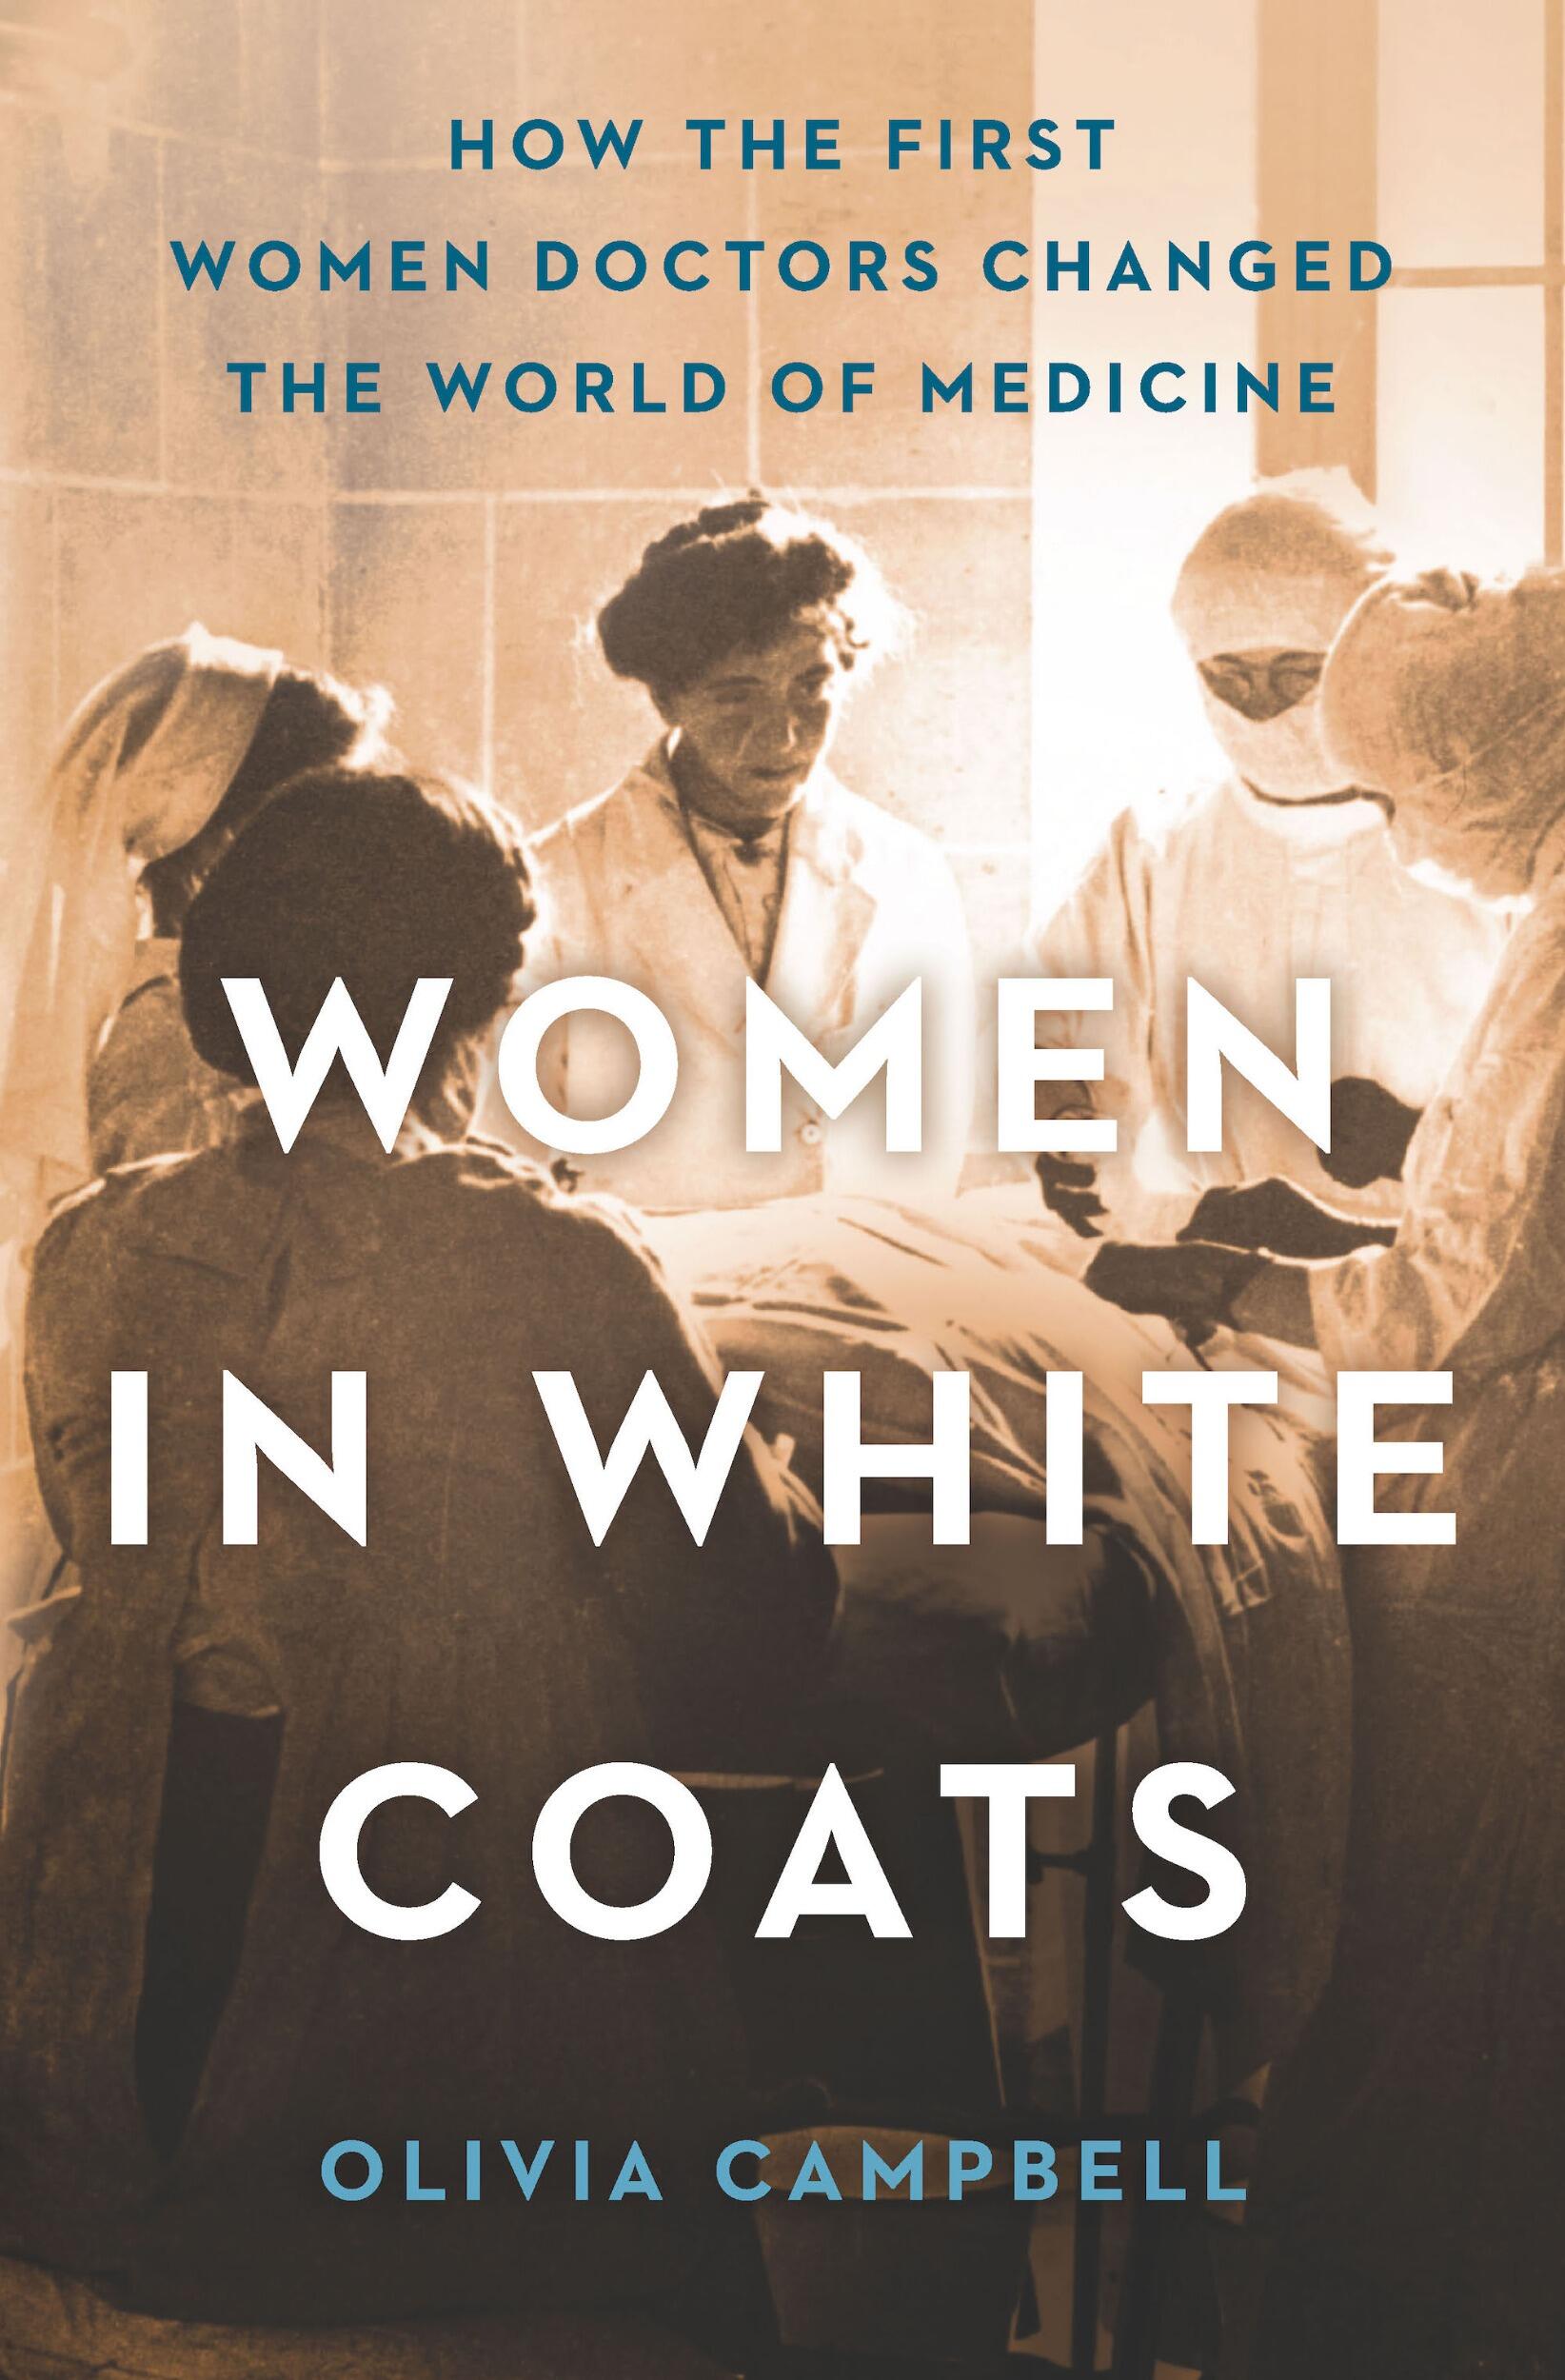 The hardcover edition of Olivia Campbell's \"Women in White Coats,\" published in 2021.